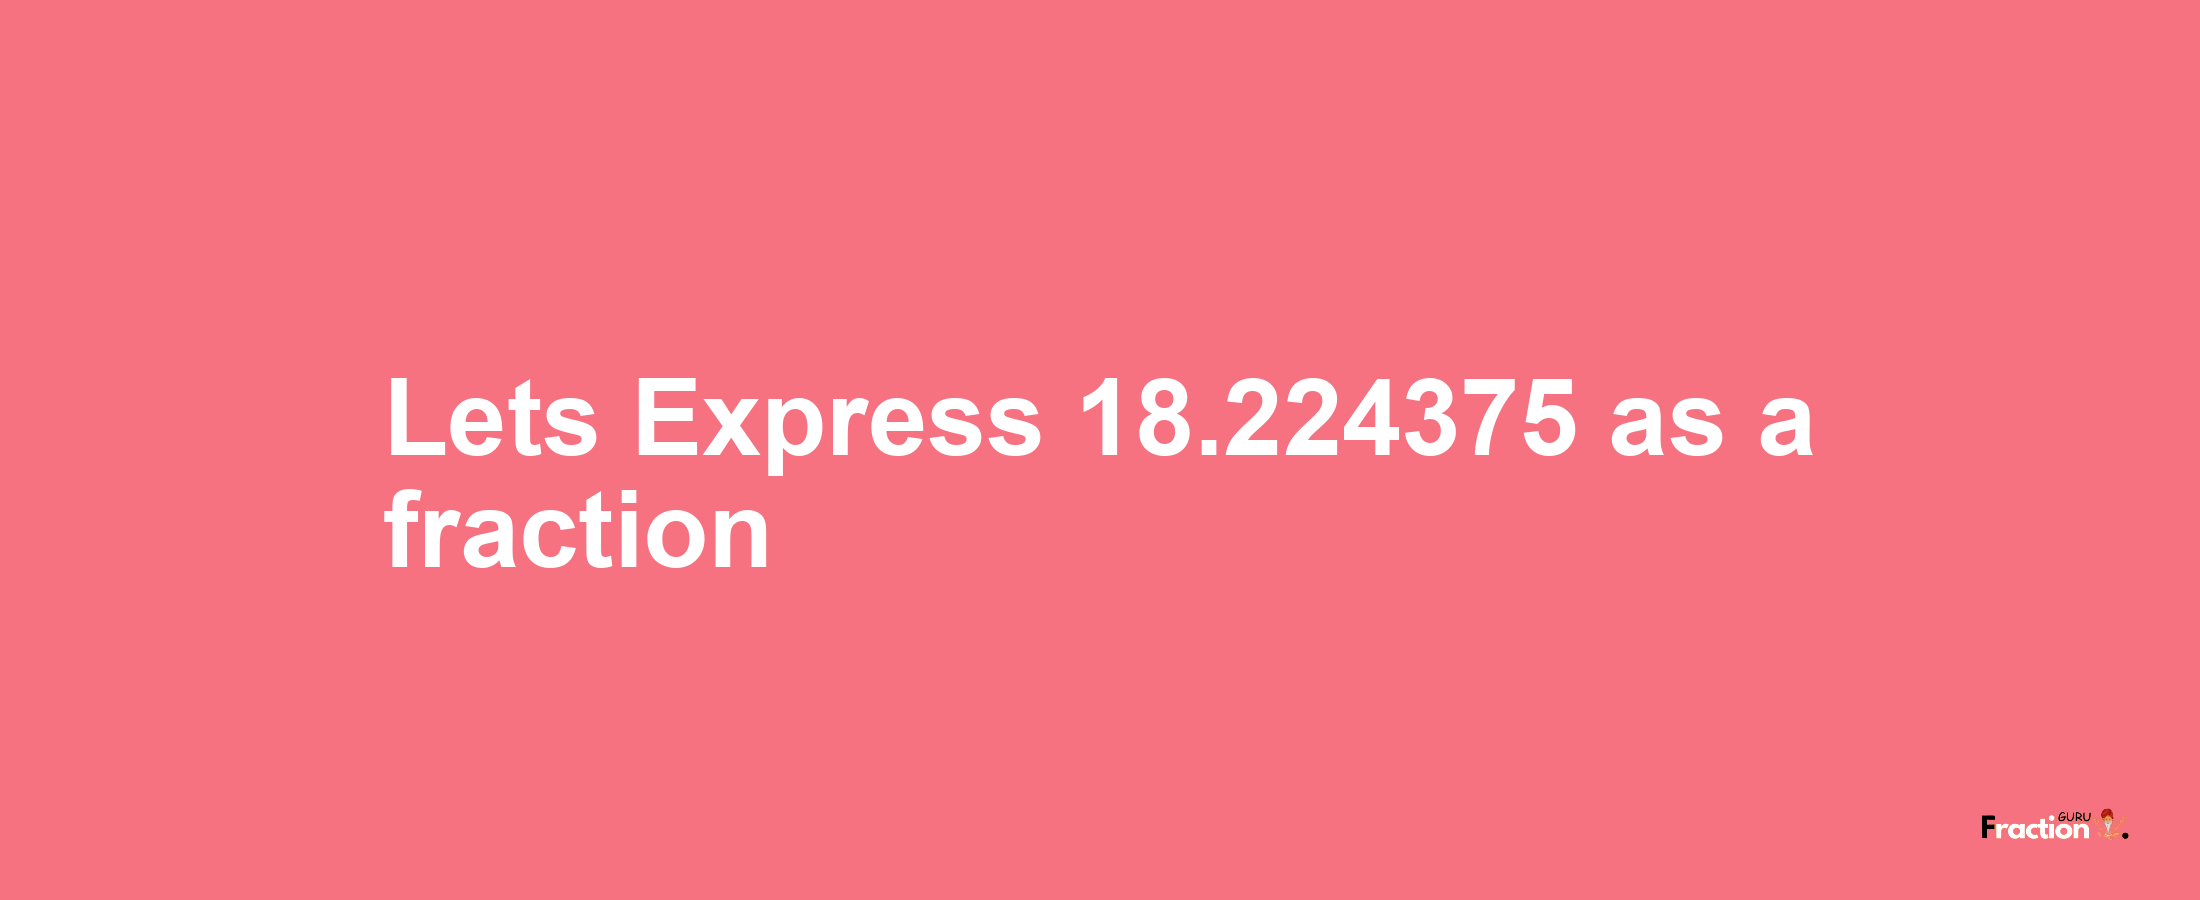 Lets Express 18.224375 as afraction